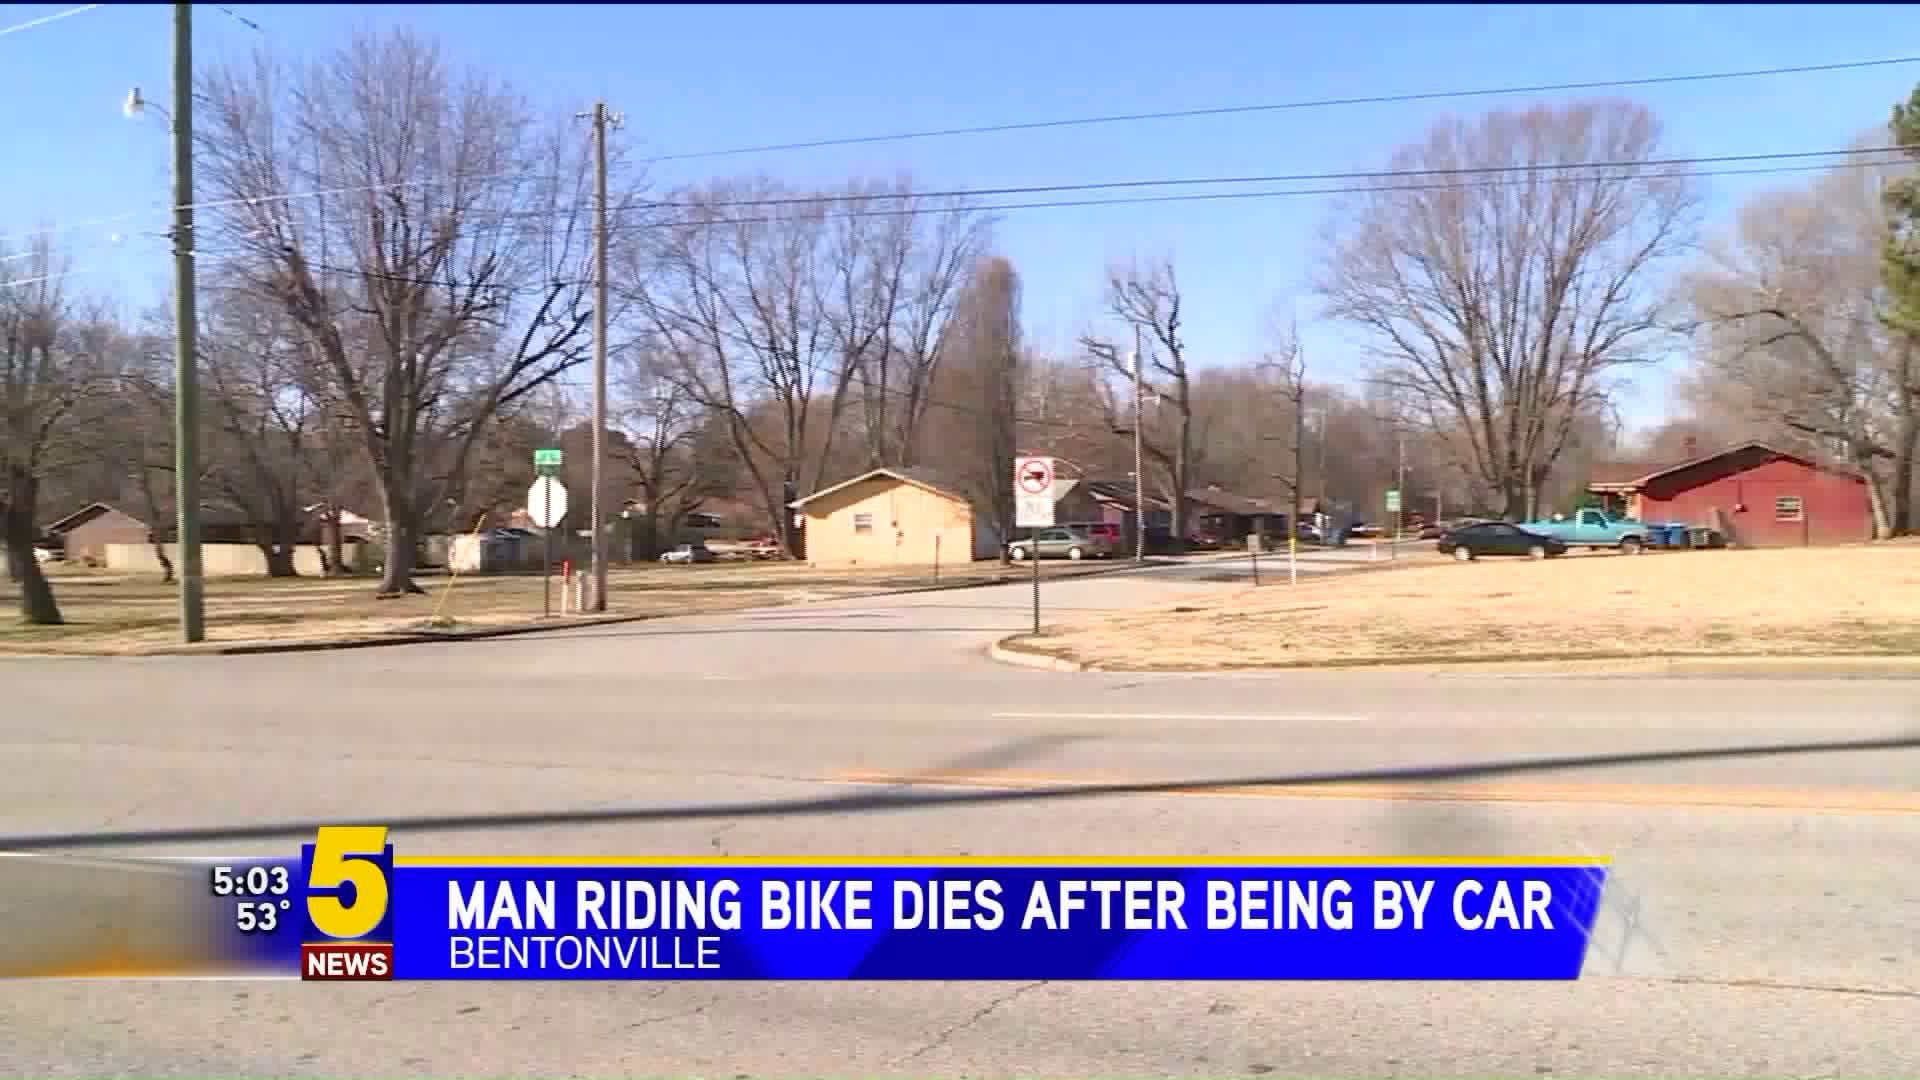 Man riding bike dies after being hit by car